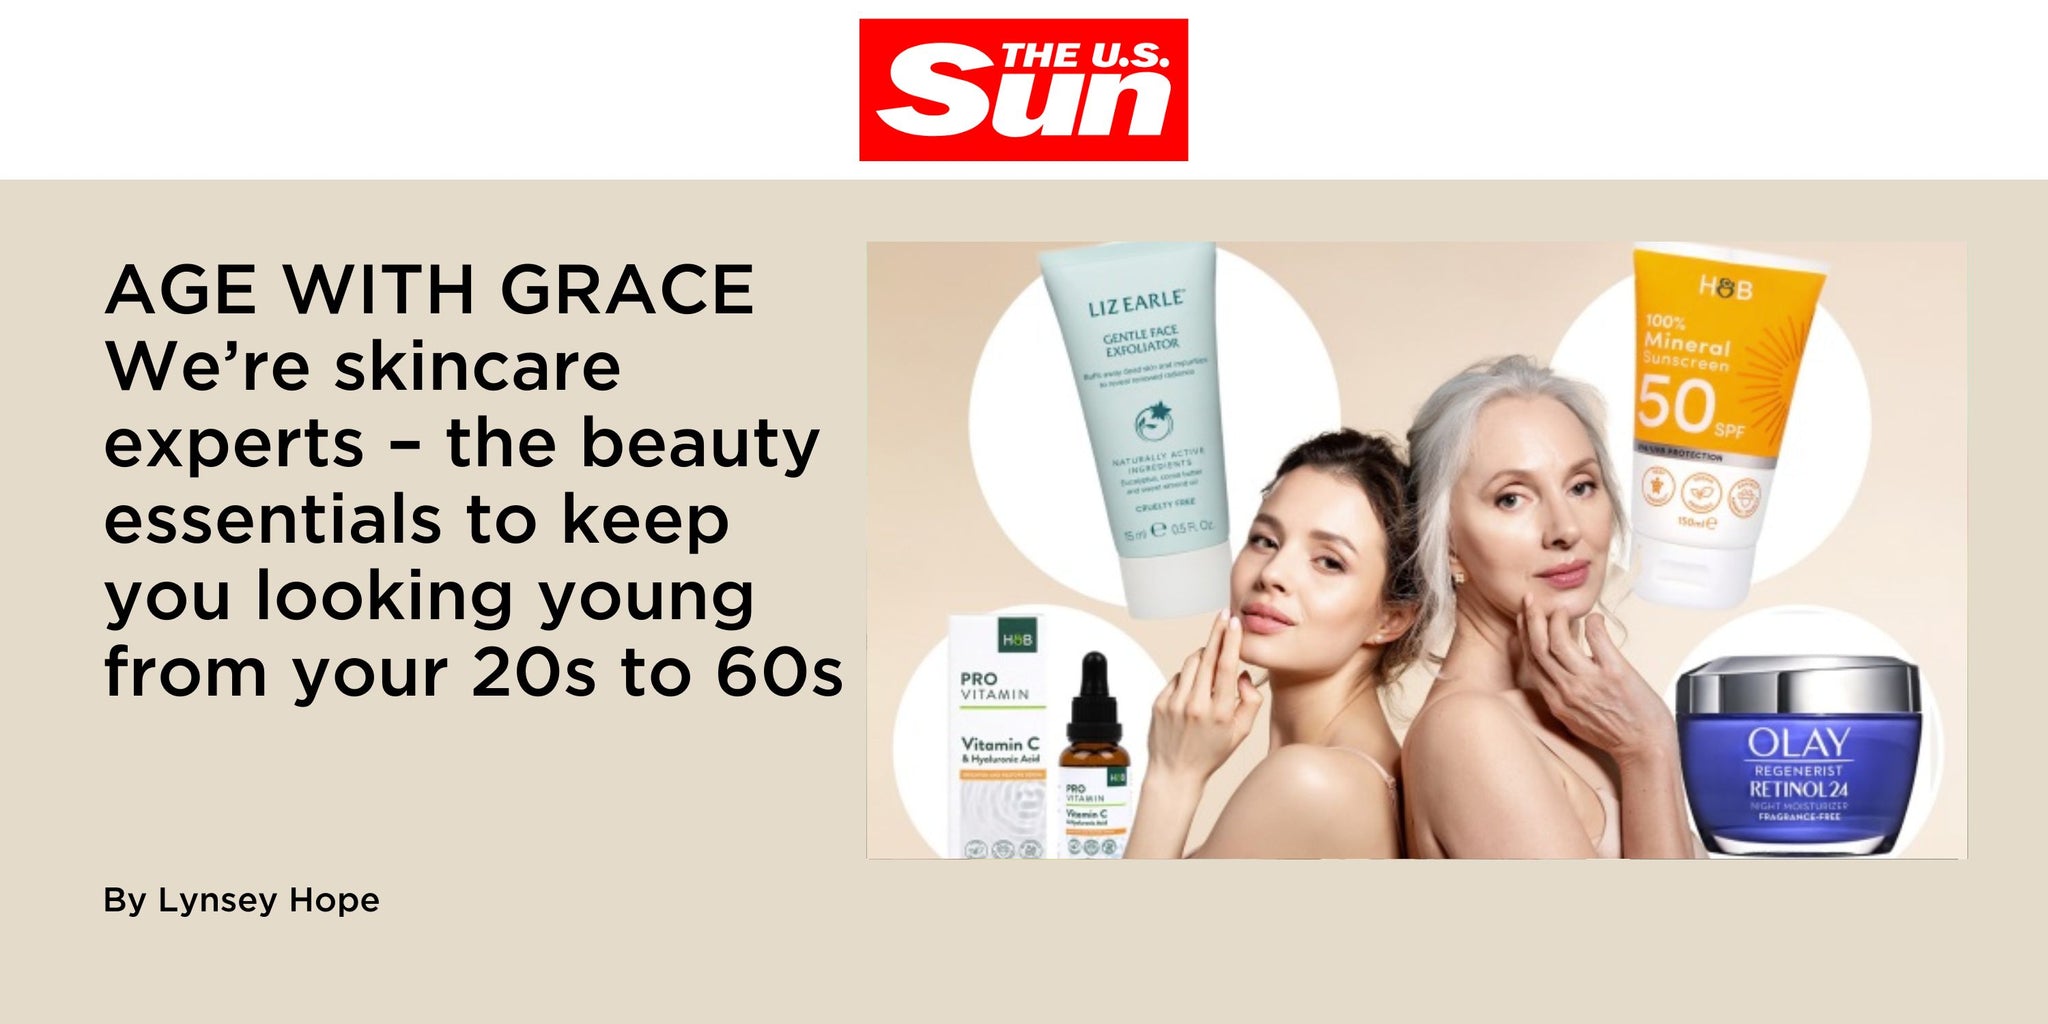 AGE WITH GRACE We’re skincare experts – the beauty essentials to keep you looking young from your 20s to 60s